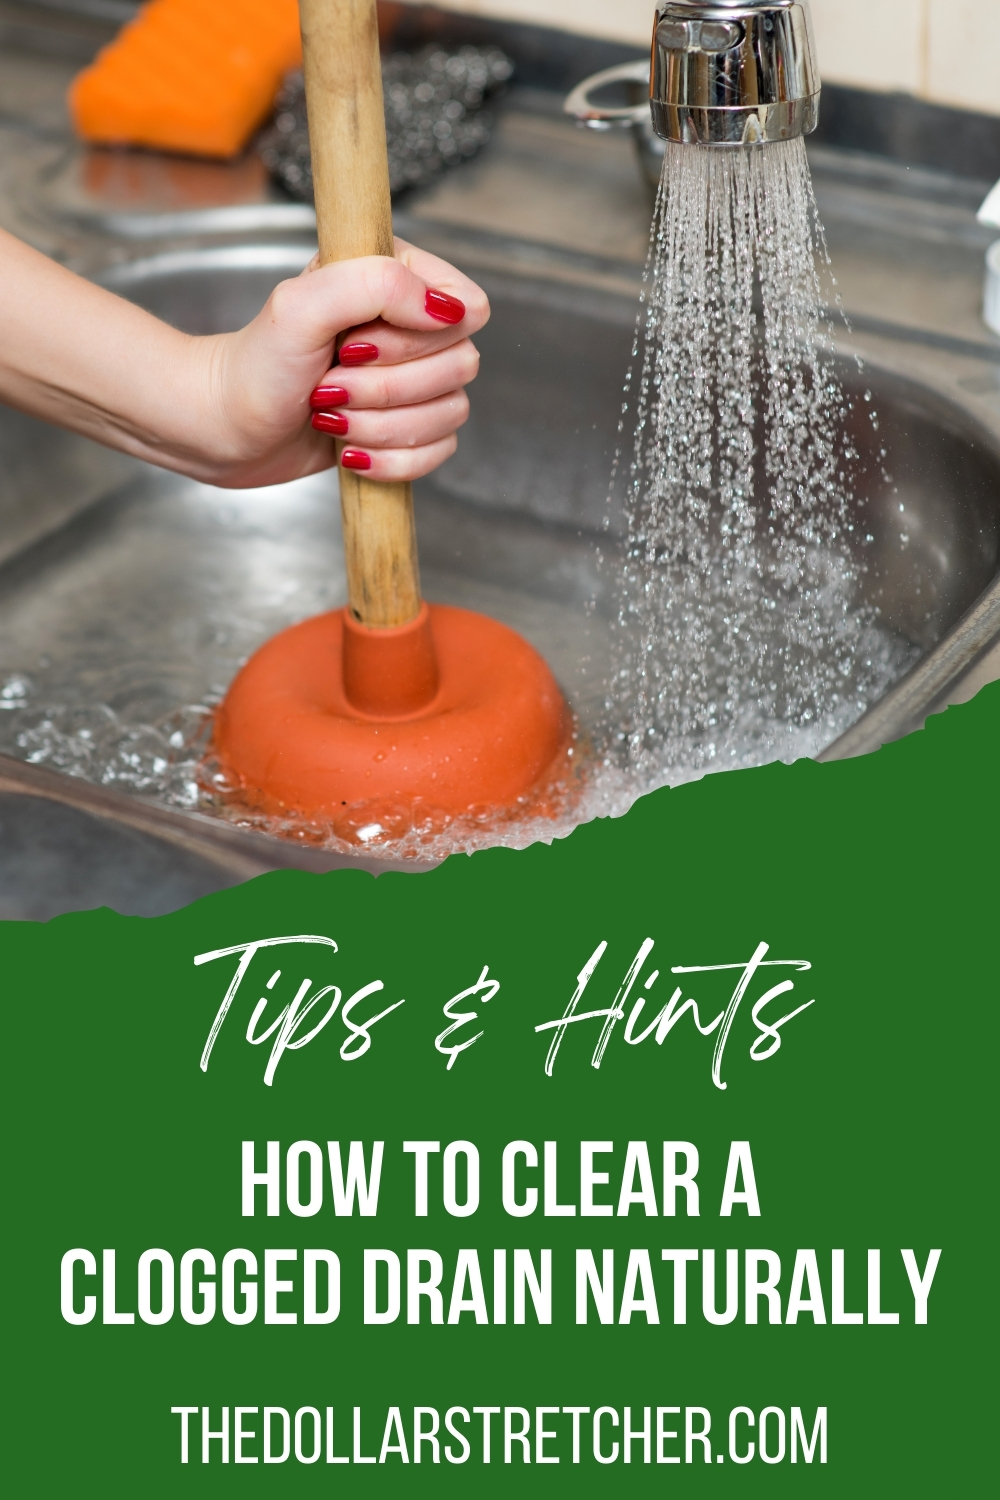 How To Clear a Clogged Drain Naturally PIN